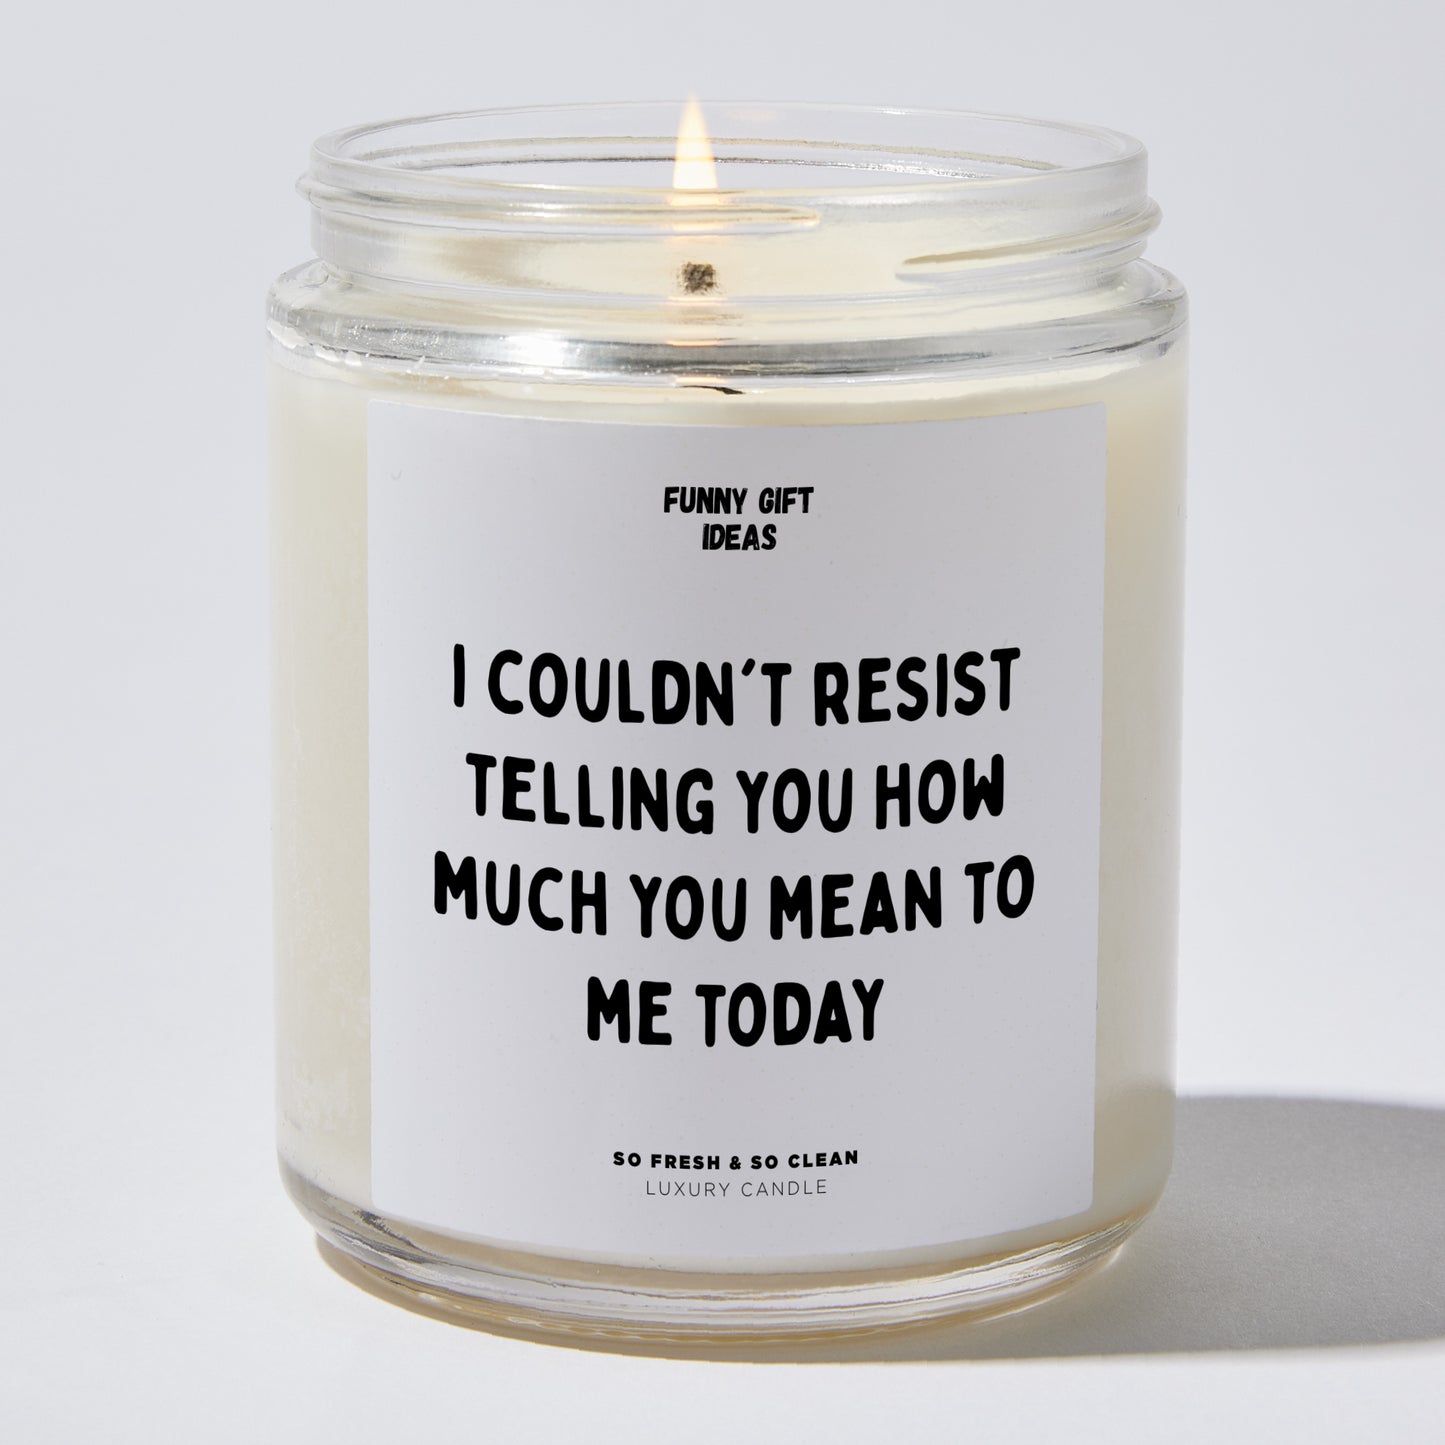 Anniversary Present - I Couldn't Resist Telling You How Much You Mean to Me Today. - Candle